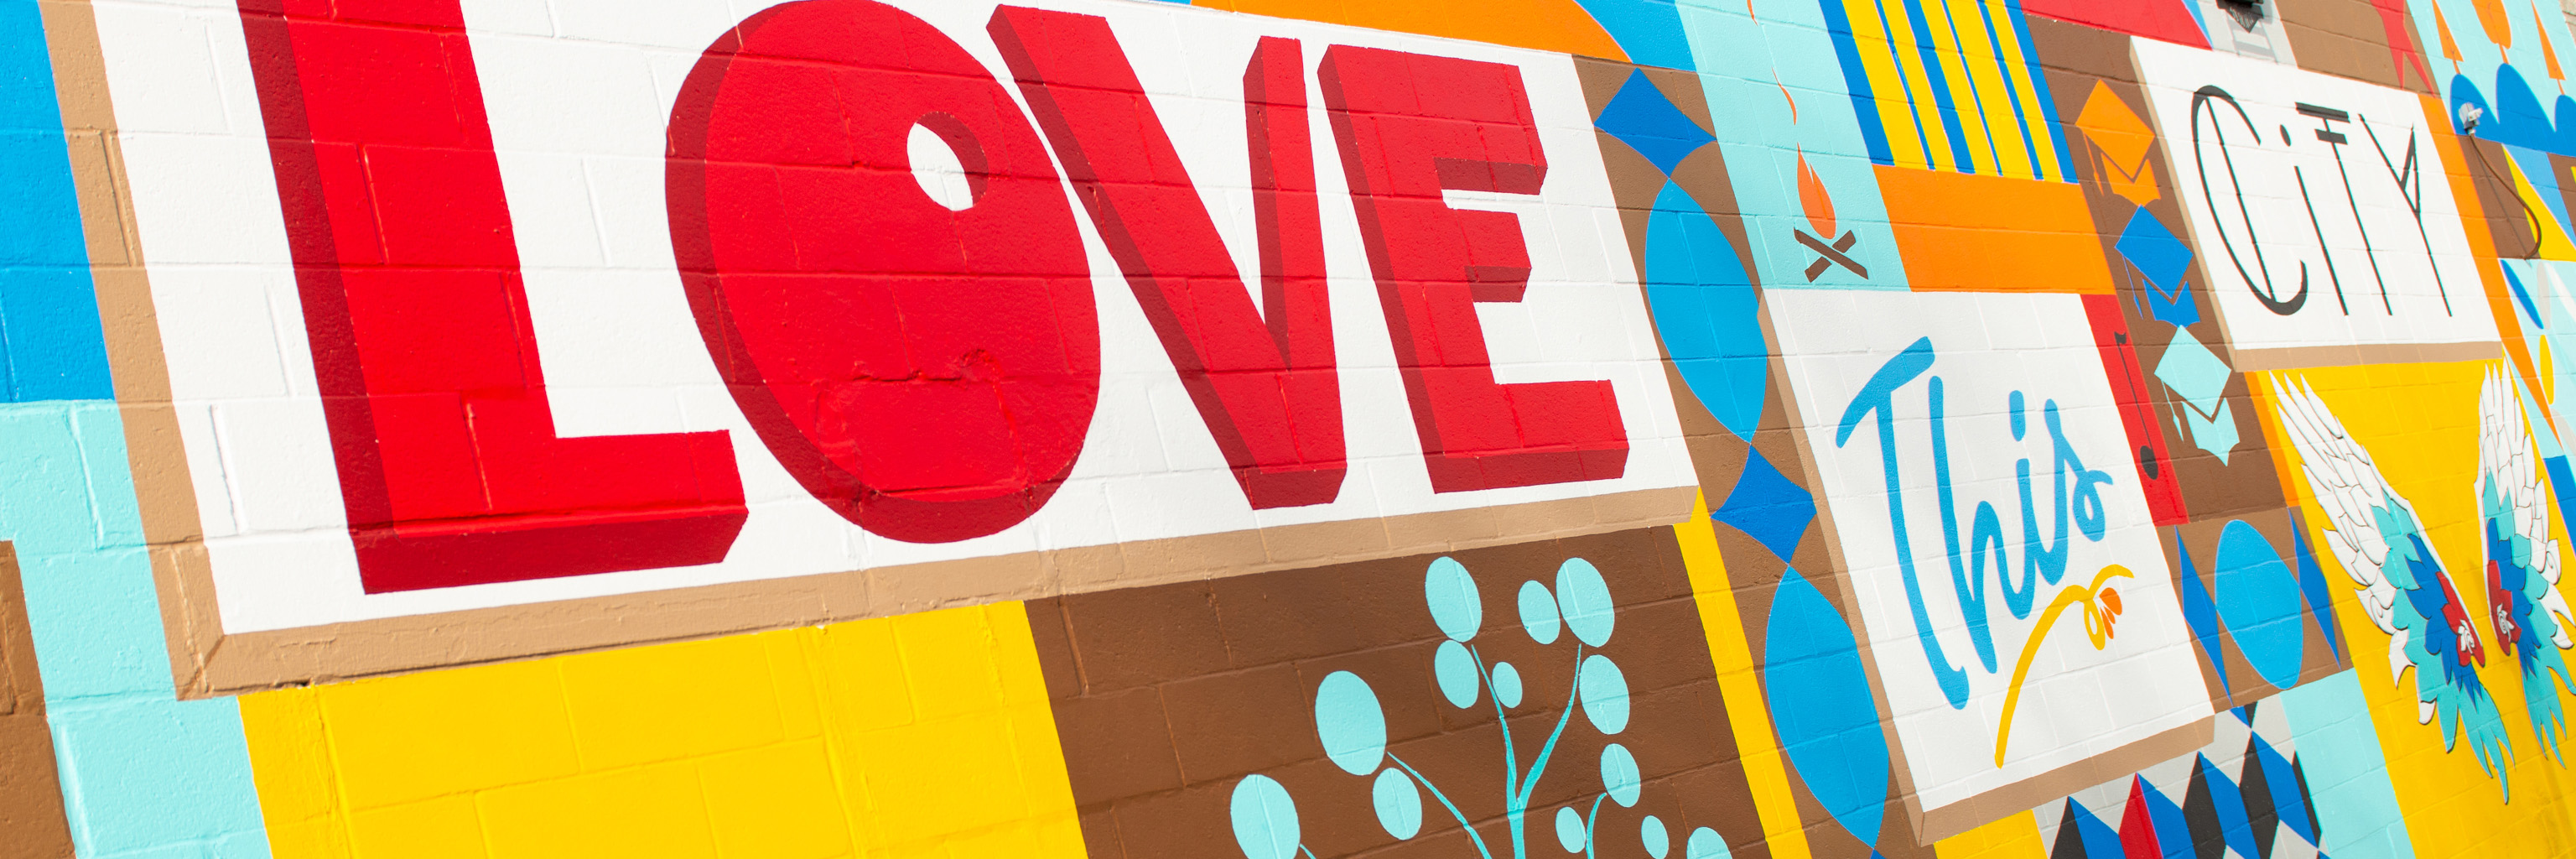 "Love this city" mural in Bloomington, Indiana